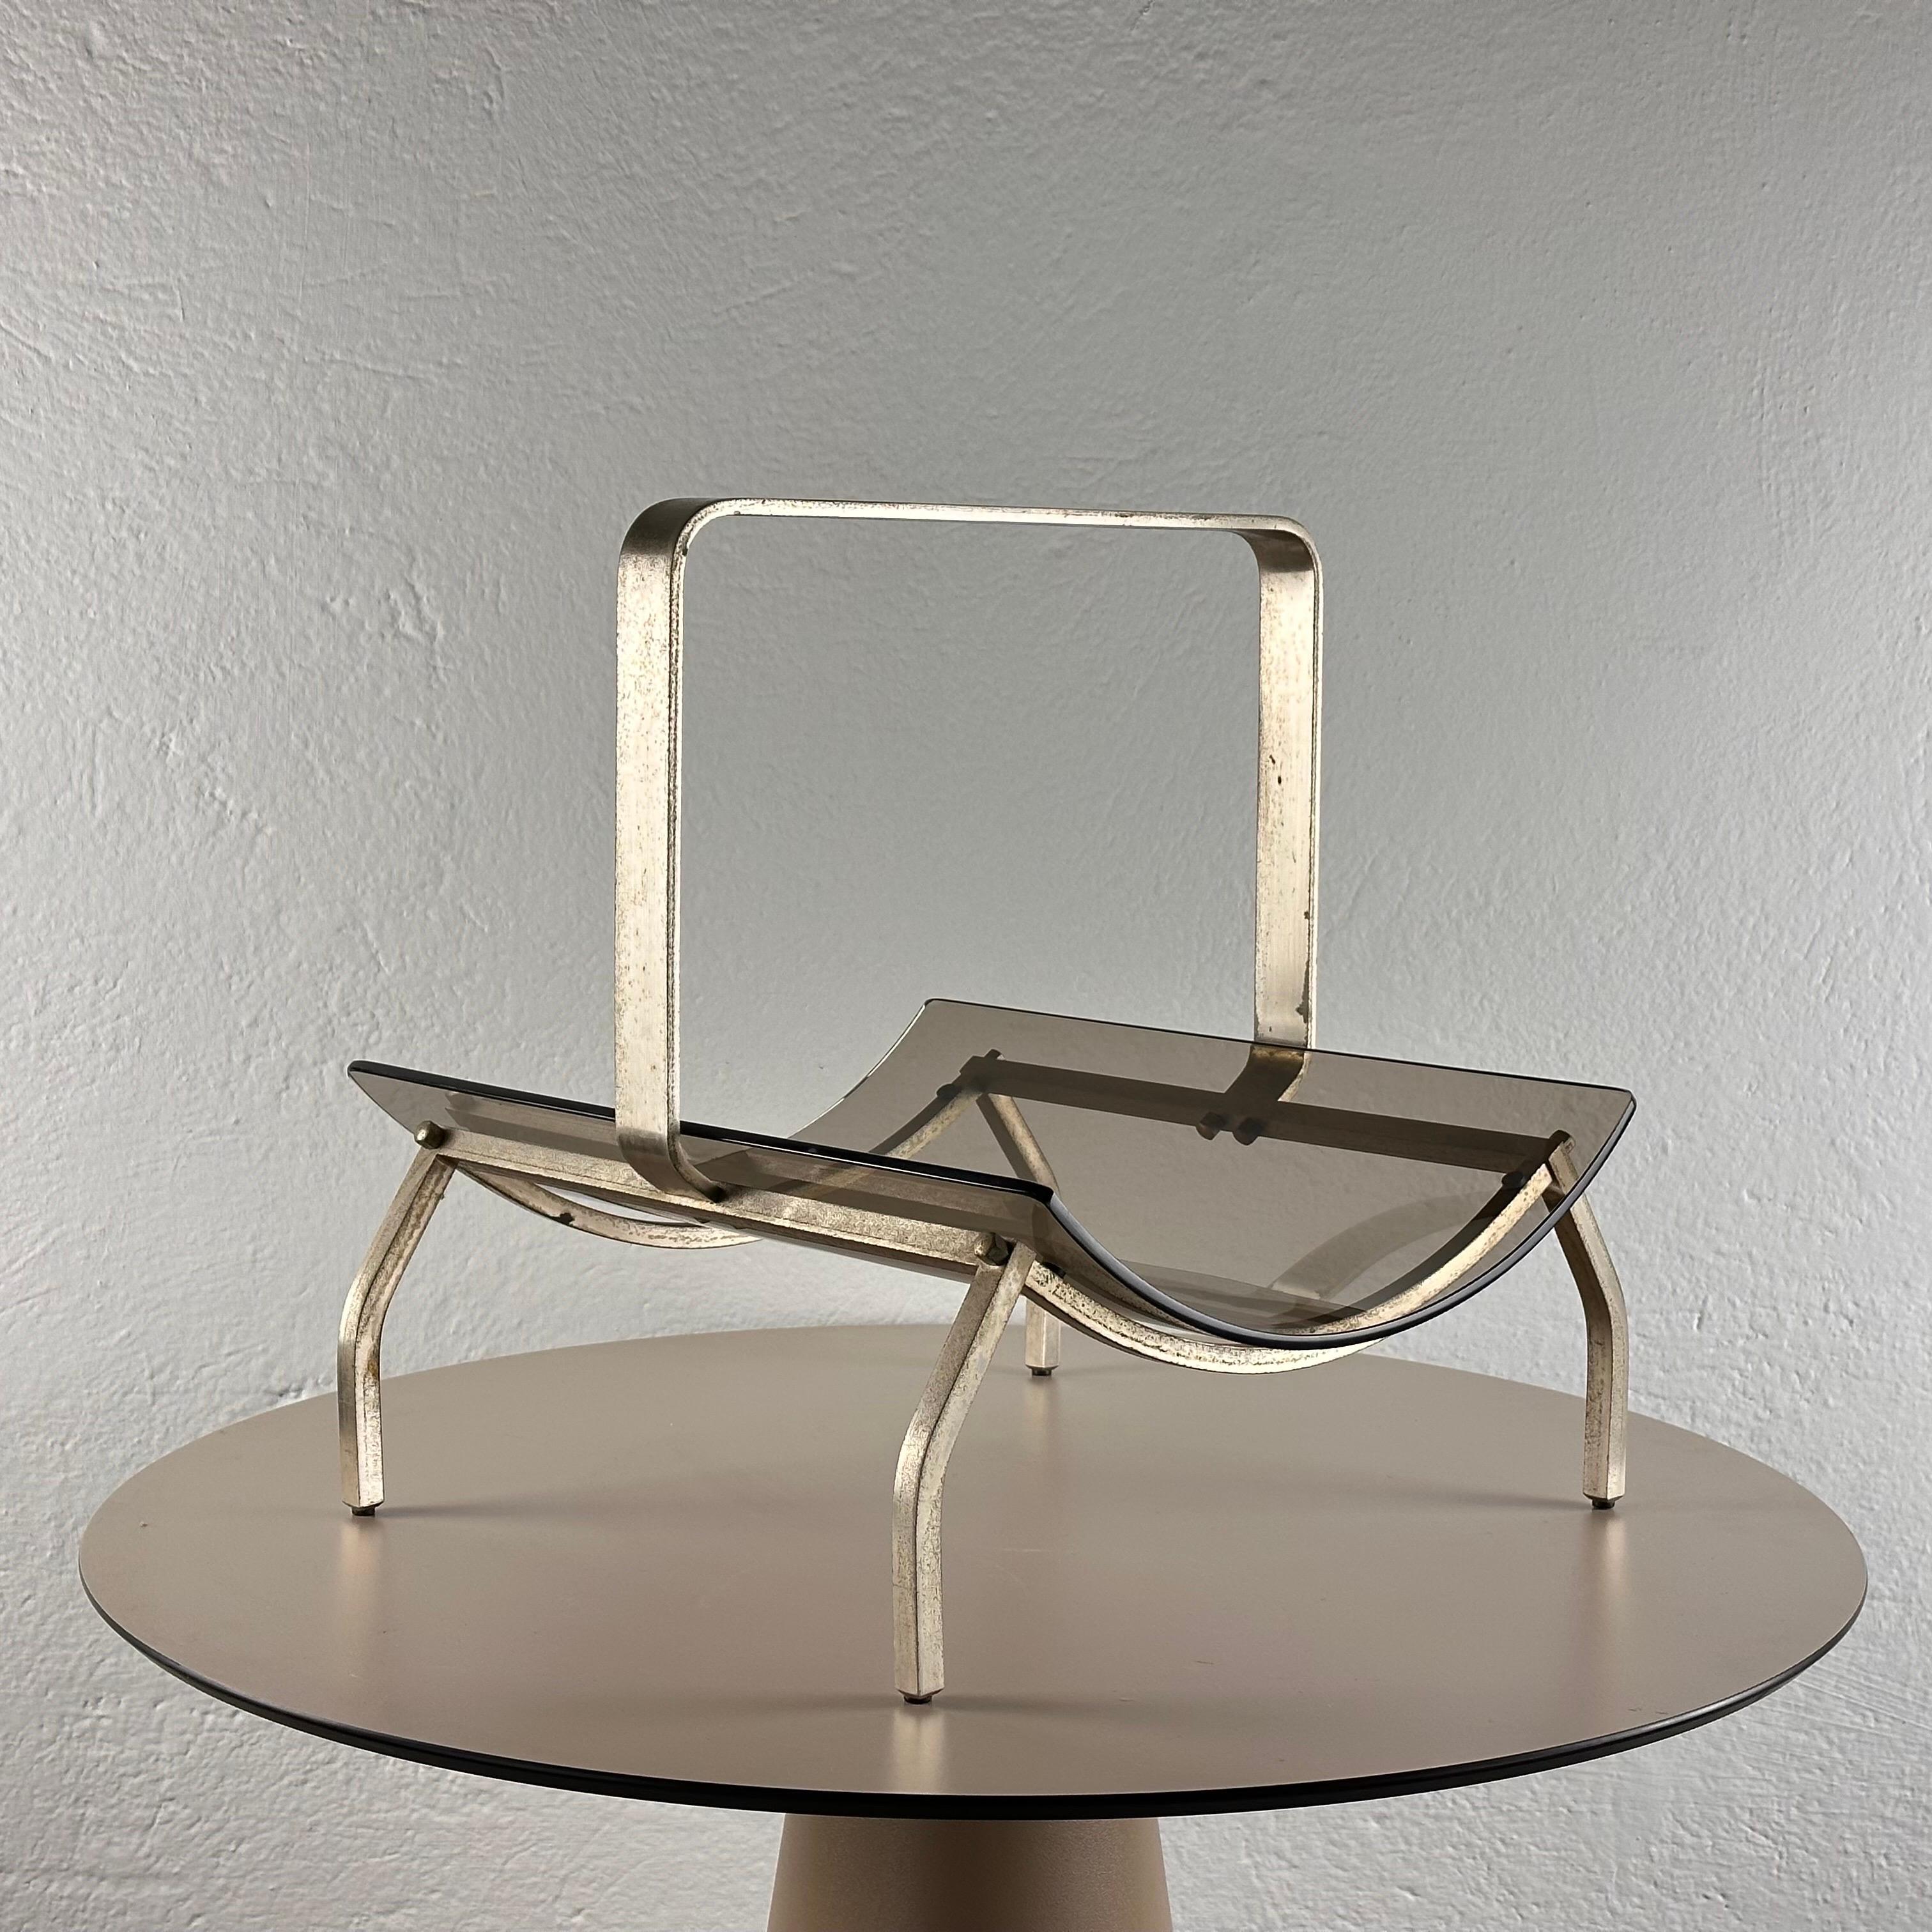 This functional yet artful piece seamlessly blends form and function, embodying the era's sophisticated design ethos.

Crafted with precision, the stand features a curved tempered glass shelf that exudes elegance and modernity. Resting on a sturdy